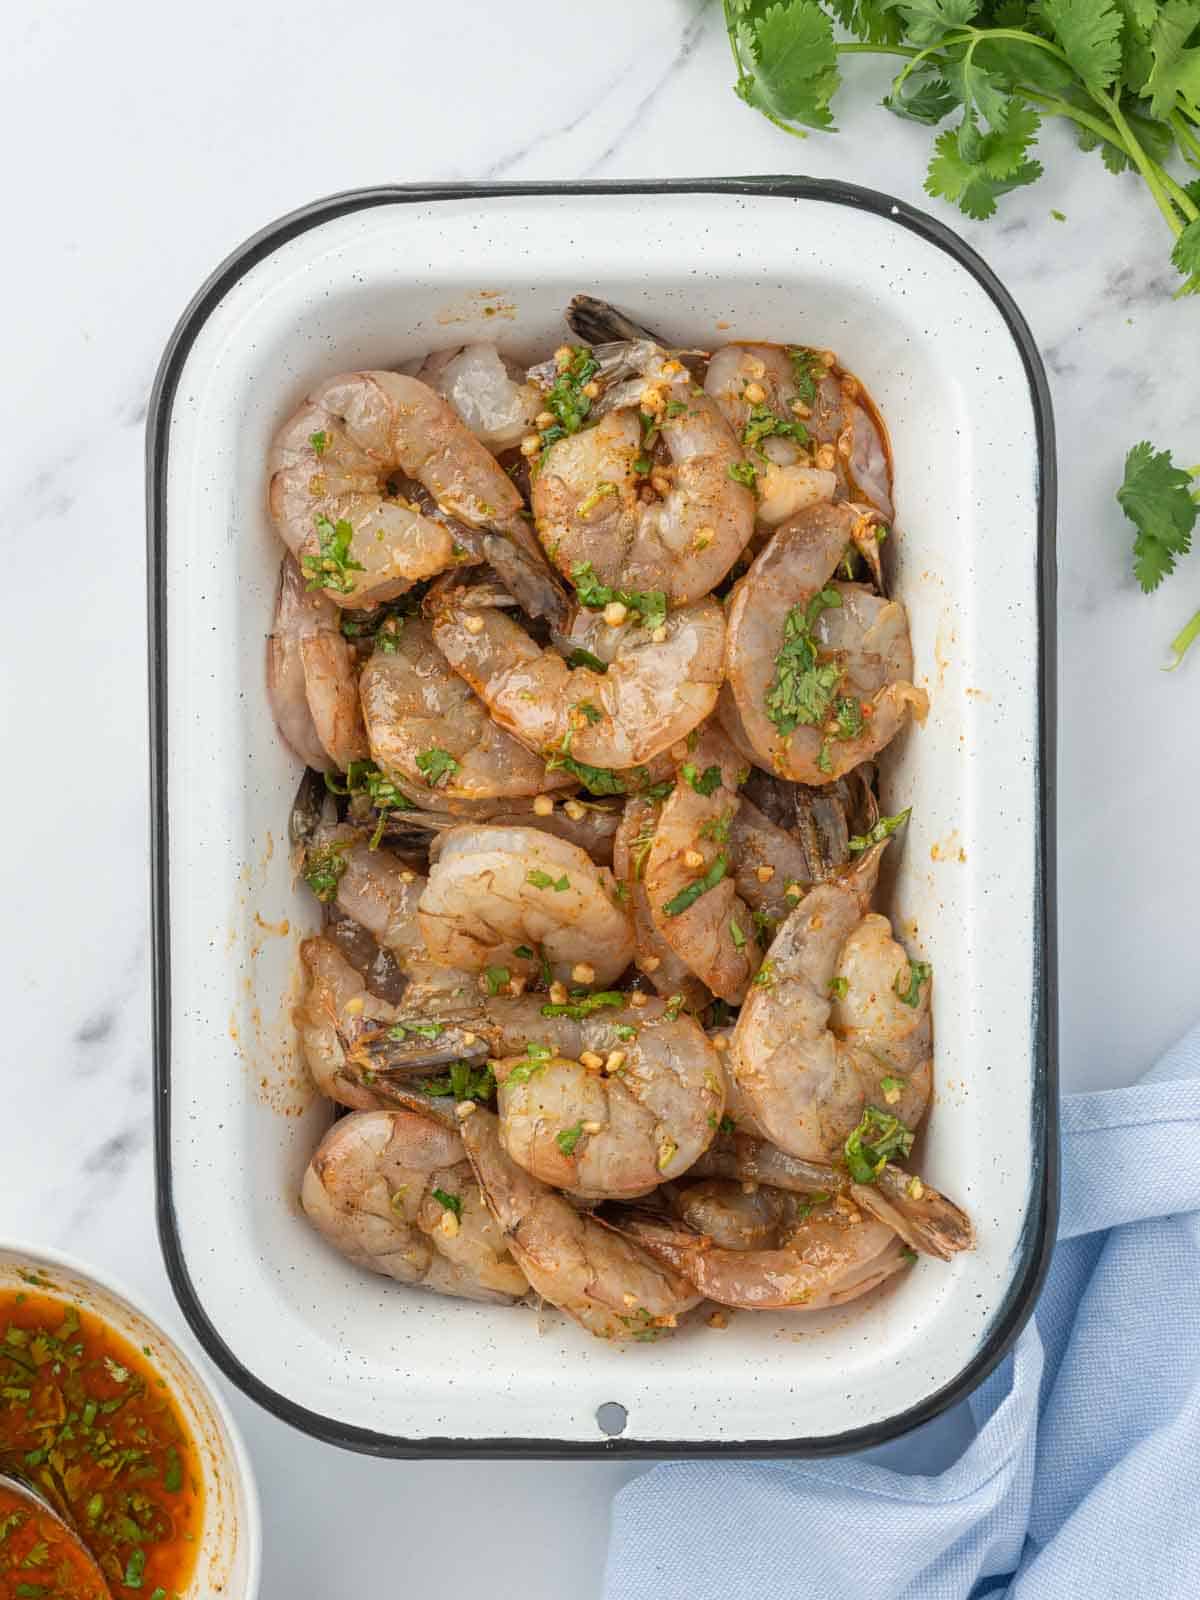 Shrimp are marinating in a tasty chili lime sauce for shrimp for 30 minutes.